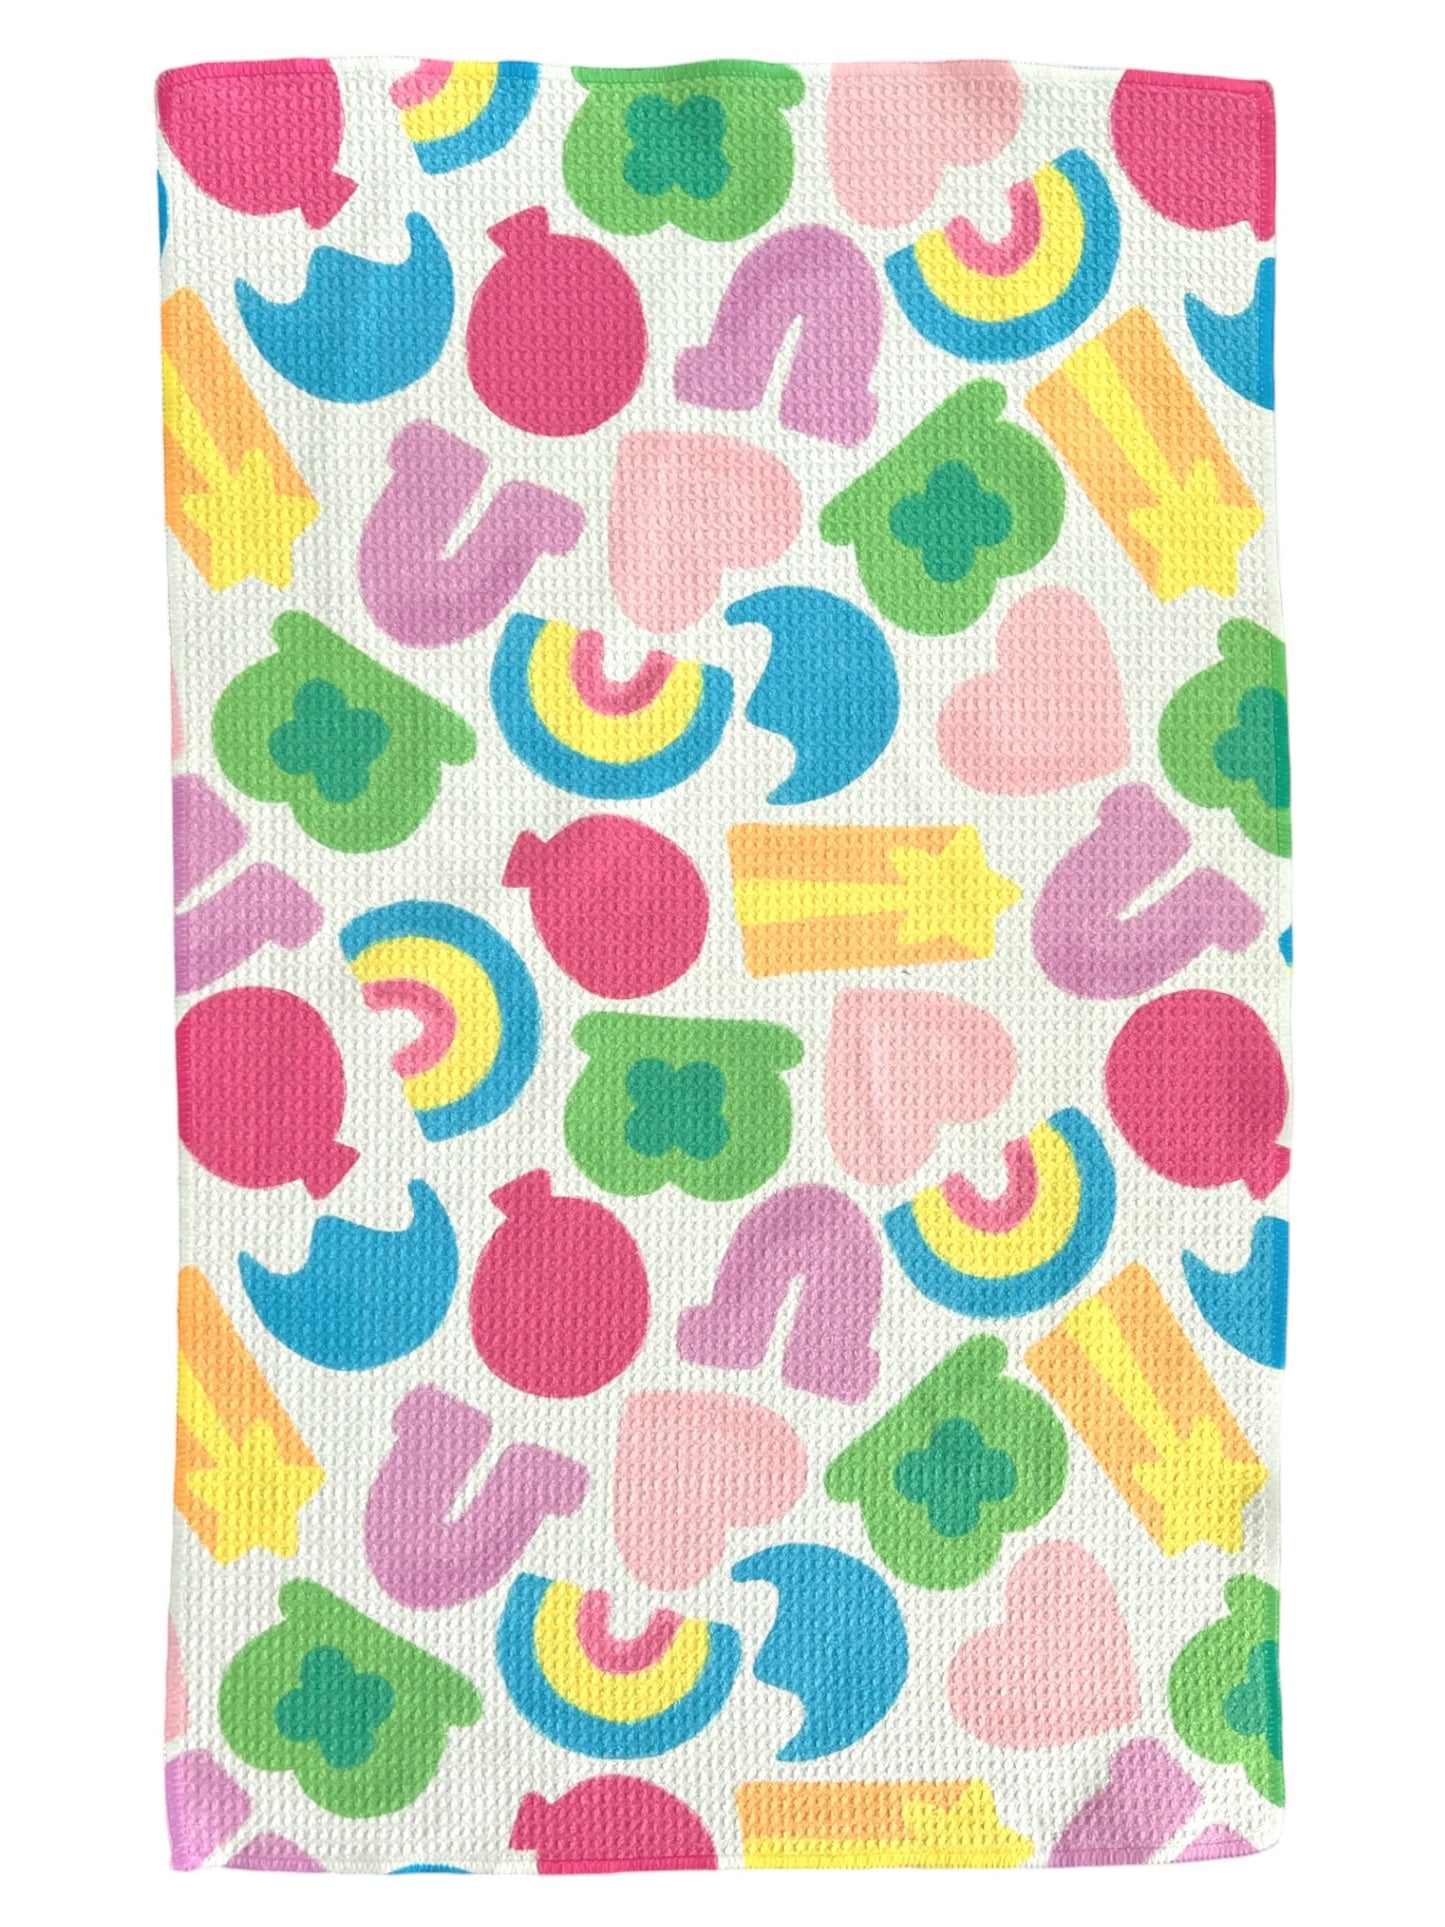 Clovers and Blue Moons: Single-Sided Hand Towel